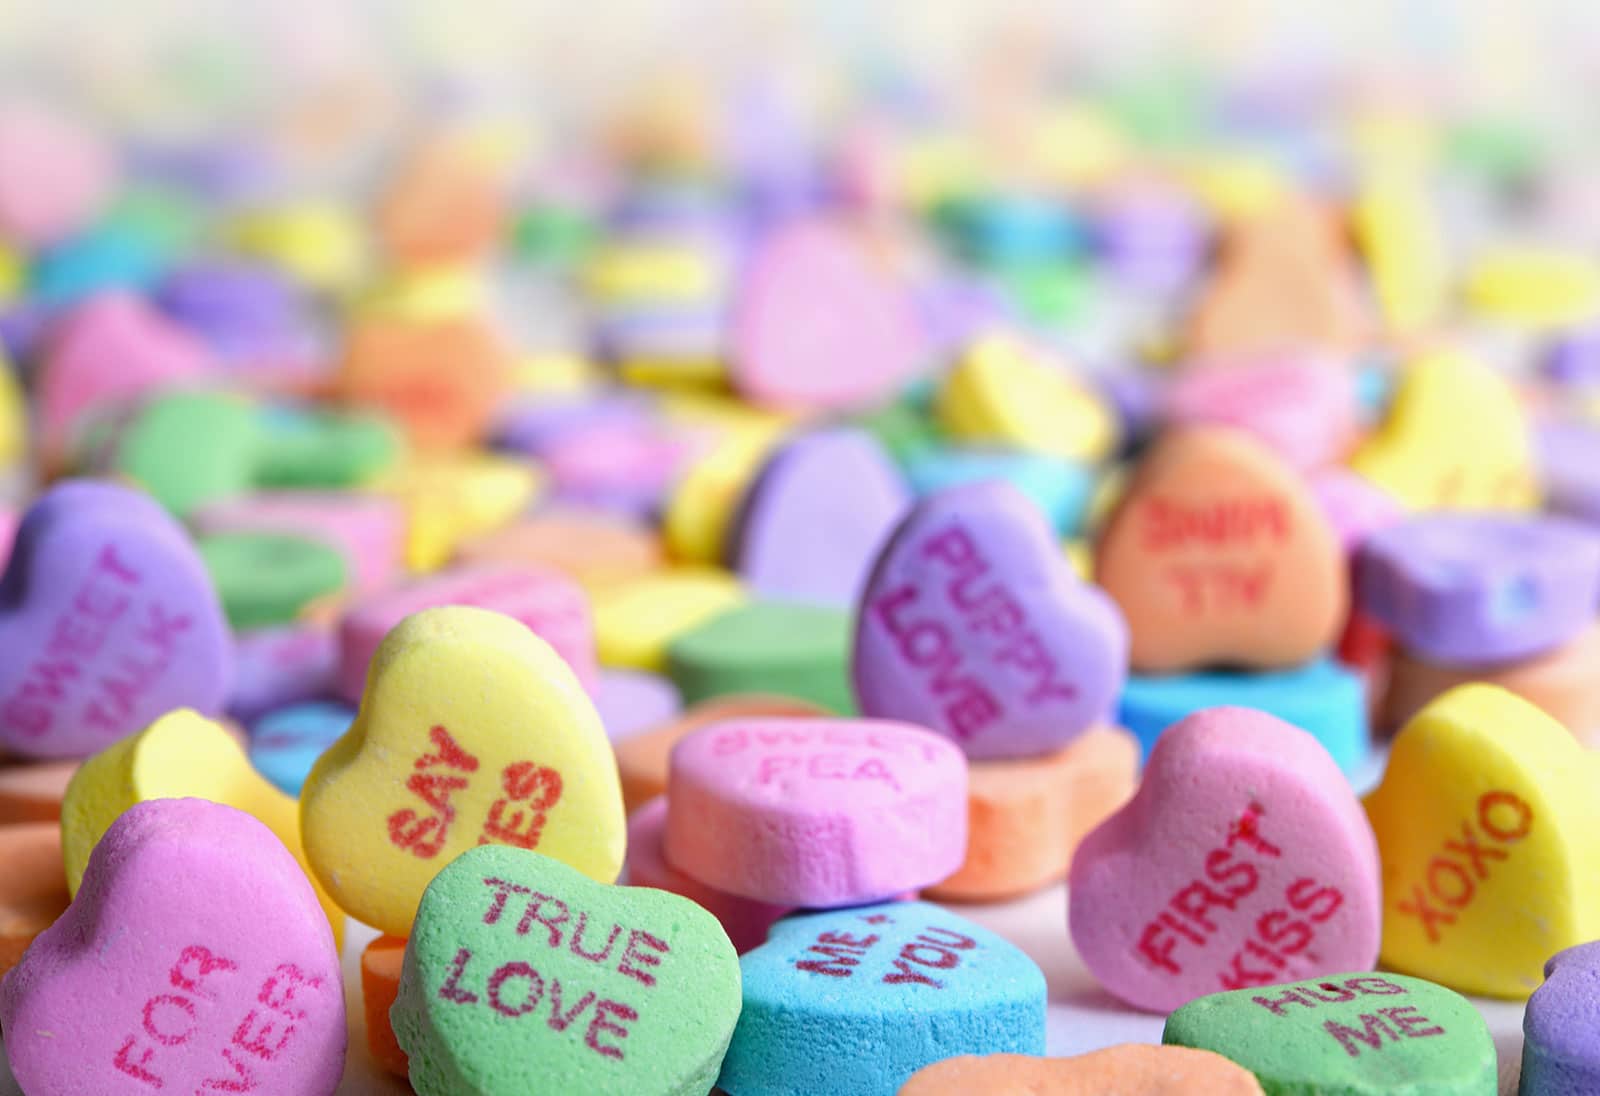 8 Tips for Successful Valentine’s Day Campaigns